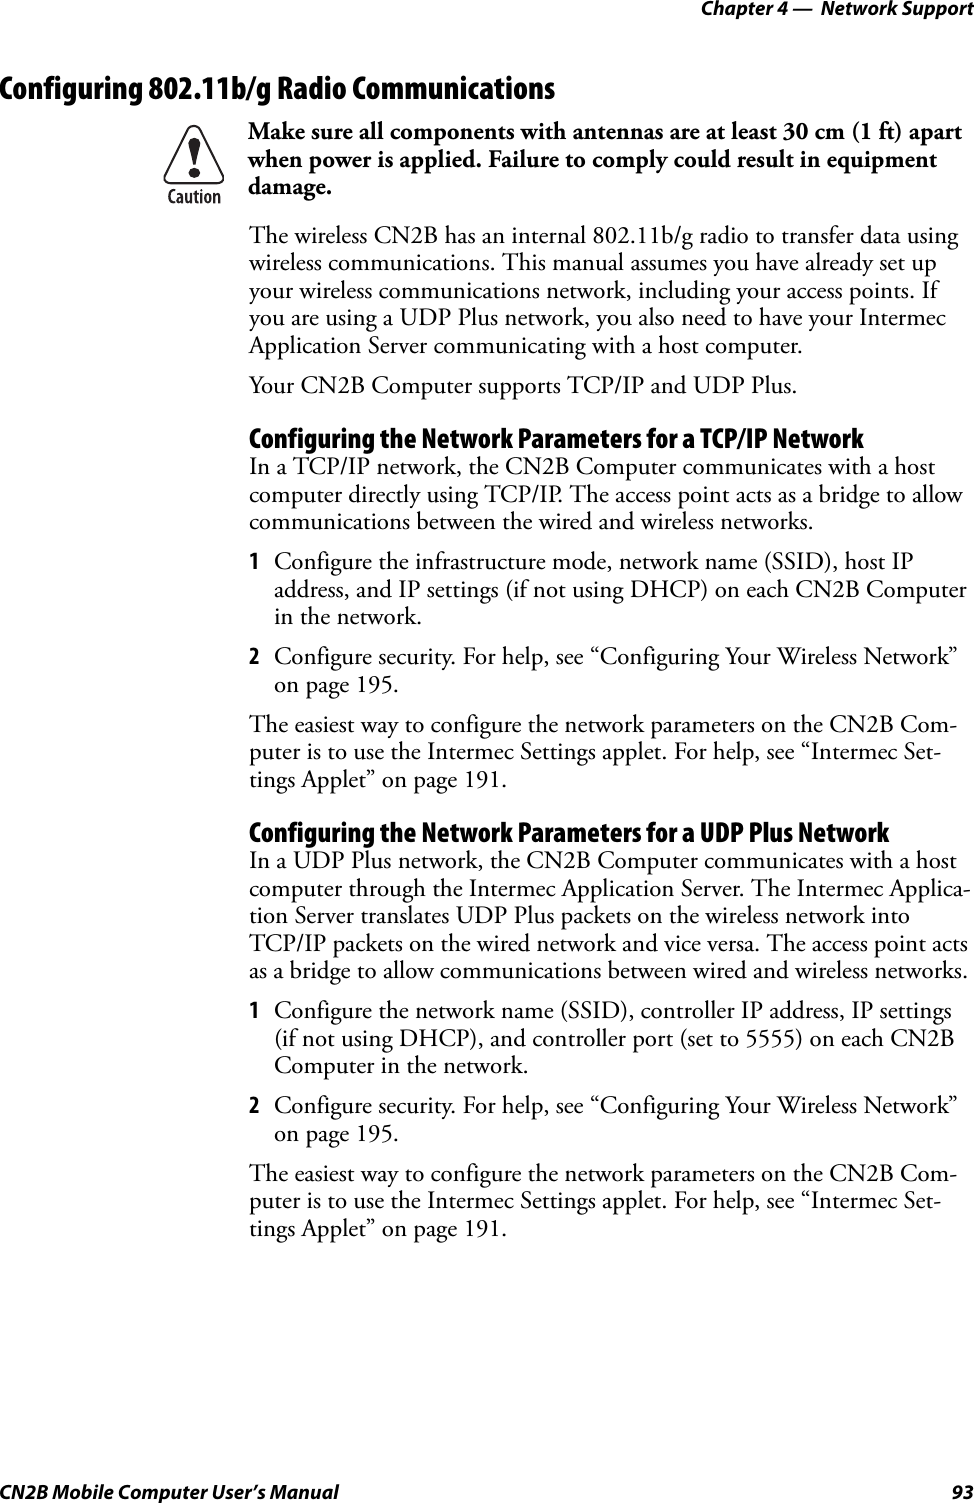 Chapter 4 —  Network SupportCN2B Mobile Computer User’s Manual 93Configuring 802.11b/g Radio CommunicationsThe wireless CN2B has an internal 802.11b/g radio to transfer data using wireless communications. This manual assumes you have already set up your wireless communications network, including your access points. If you are using a UDP Plus network, you also need to have your Intermec Application Server communicating with a host computer.Your CN2B Computer supports TCP/IP and UDP Plus.Configuring the Network Parameters for a TCP/IP NetworkIn a TCP/IP network, the CN2B Computer communicates with a host computer directly using TCP/IP. The access point acts as a bridge to allow communications between the wired and wireless networks.1Configure the infrastructure mode, network name (SSID), host IP address, and IP settings (if not using DHCP) on each CN2B Computer in the network.2Configure security. For help, see “Configuring Your Wireless Network” on page 195.The easiest way to configure the network parameters on the CN2B Com-puter is to use the Intermec Settings applet. For help, see “Intermec Set-tings Applet” on page 191.Configuring the Network Parameters for a UDP Plus NetworkIn a UDP Plus network, the CN2B Computer communicates with a host computer through the Intermec Application Server. The Intermec Applica-tion Server translates UDP Plus packets on the wireless network into TCP/IP packets on the wired network and vice versa. The access point acts as a bridge to allow communications between wired and wireless networks.1Configure the network name (SSID), controller IP address, IP settings (if not using DHCP), and controller port (set to 5555) on each CN2B Computer in the network.2Configure security. For help, see “Configuring Your Wireless Network” on page 195.The easiest way to configure the network parameters on the CN2B Com-puter is to use the Intermec Settings applet. For help, see “Intermec Set-tings Applet” on page 191.Make sure all components with antennas are at least 30 cm (1 ft) apart when power is applied. Failure to comply could result in equipment damage.